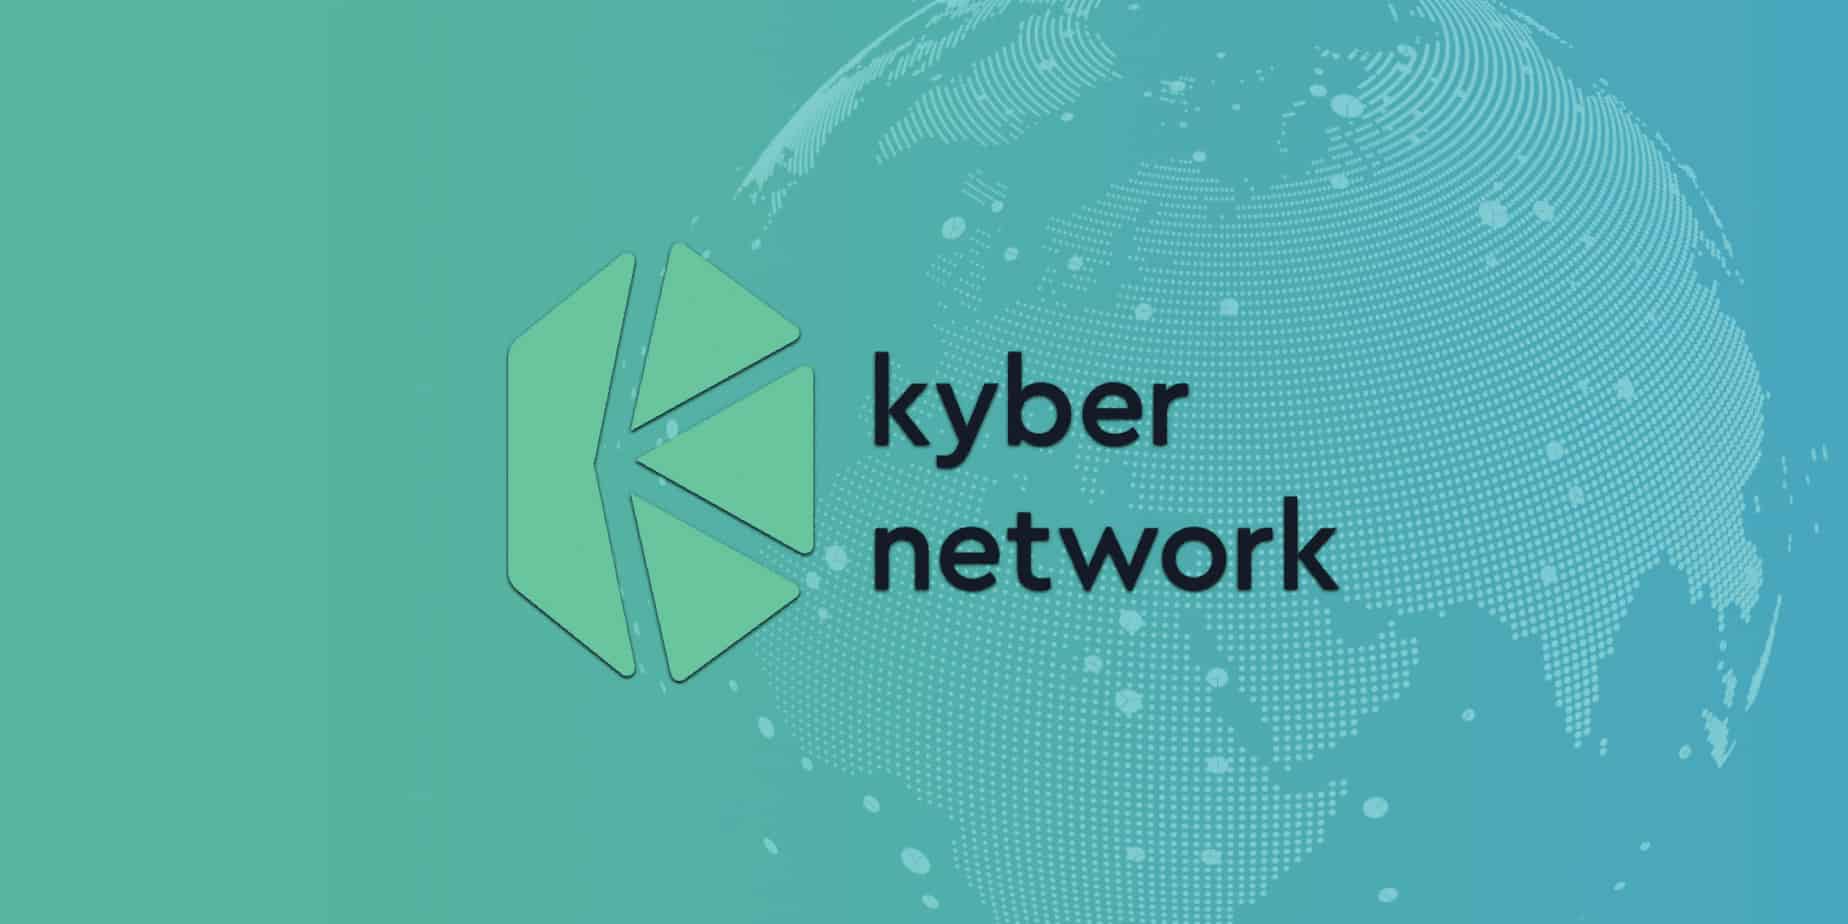 What is Kyber network and KNC?